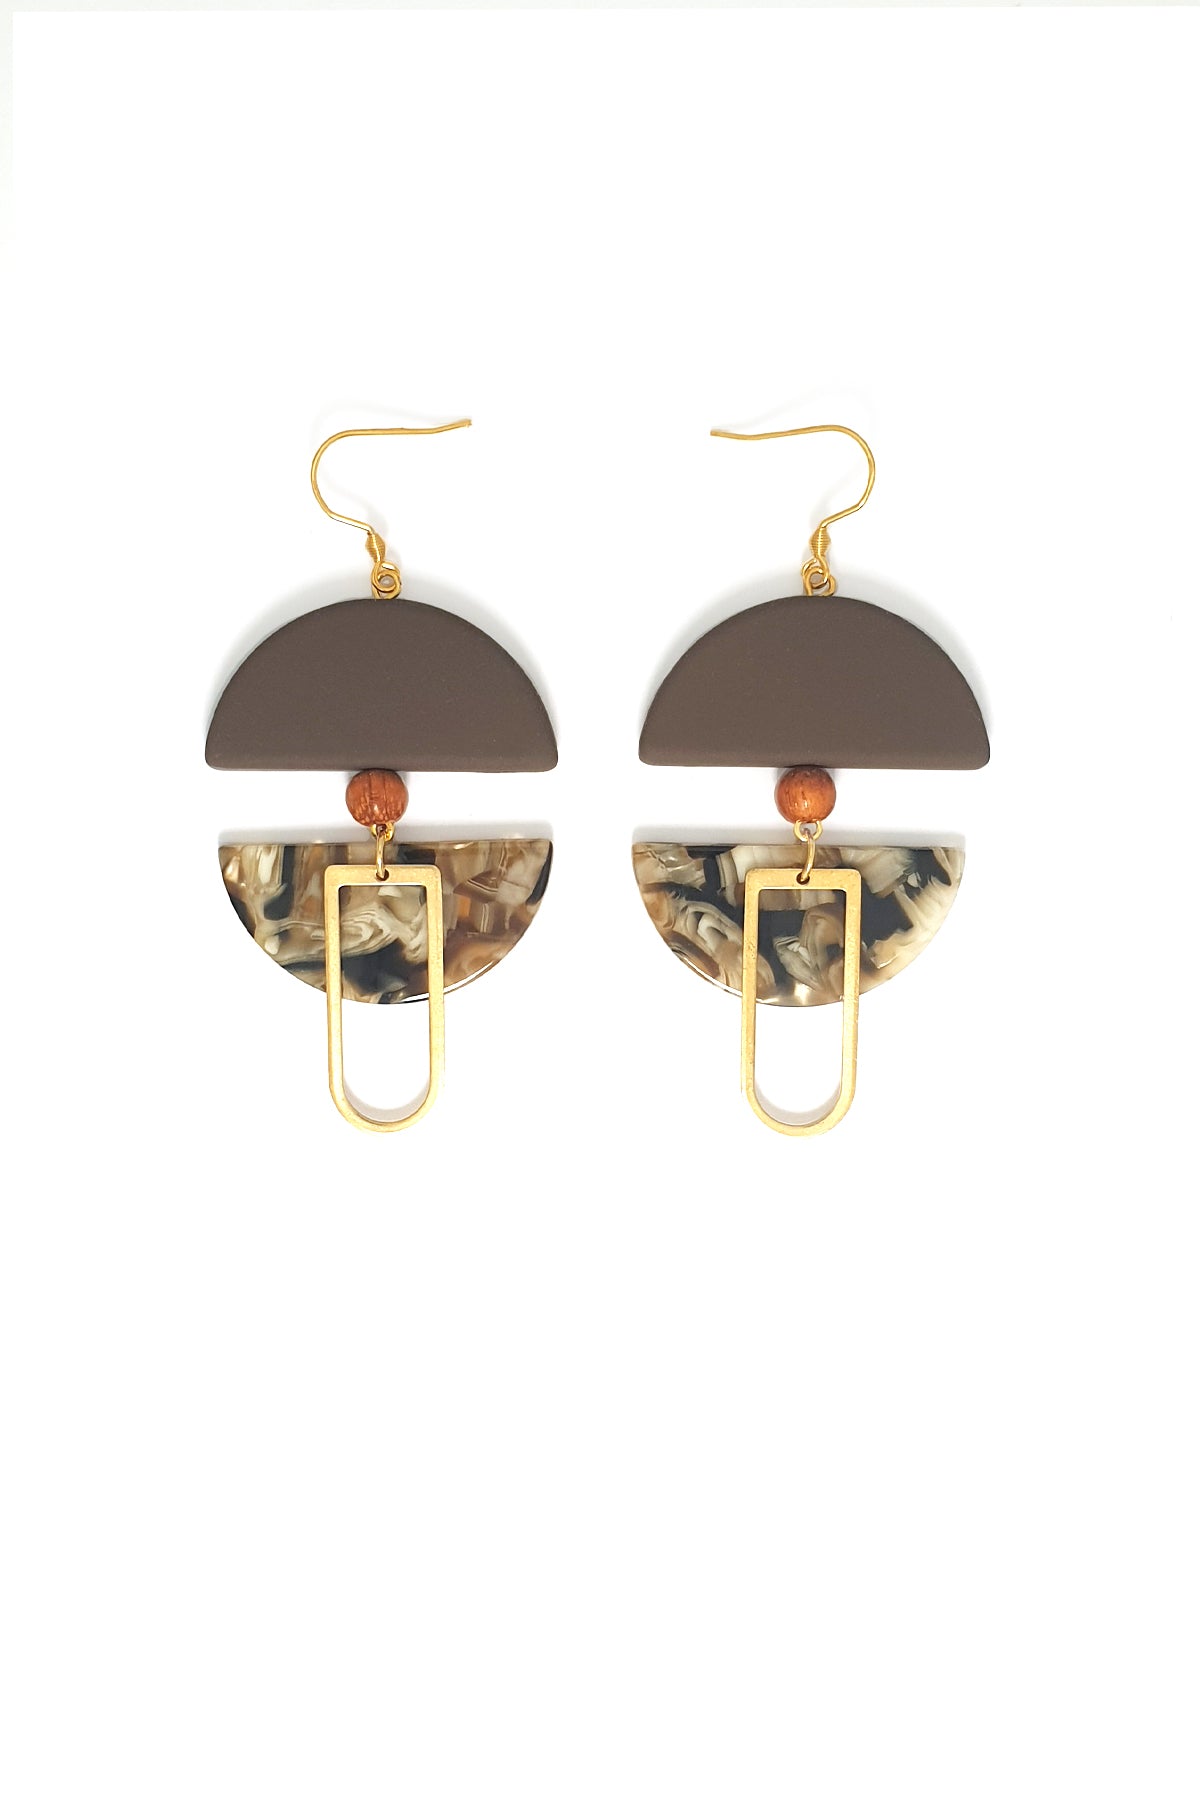 A pair of dangle earrings with a hook sit against a white background. They feature a brown arch shaped bead, a small wooden bead, a brown acrylic half circle, and an elongated D shape brass piece.